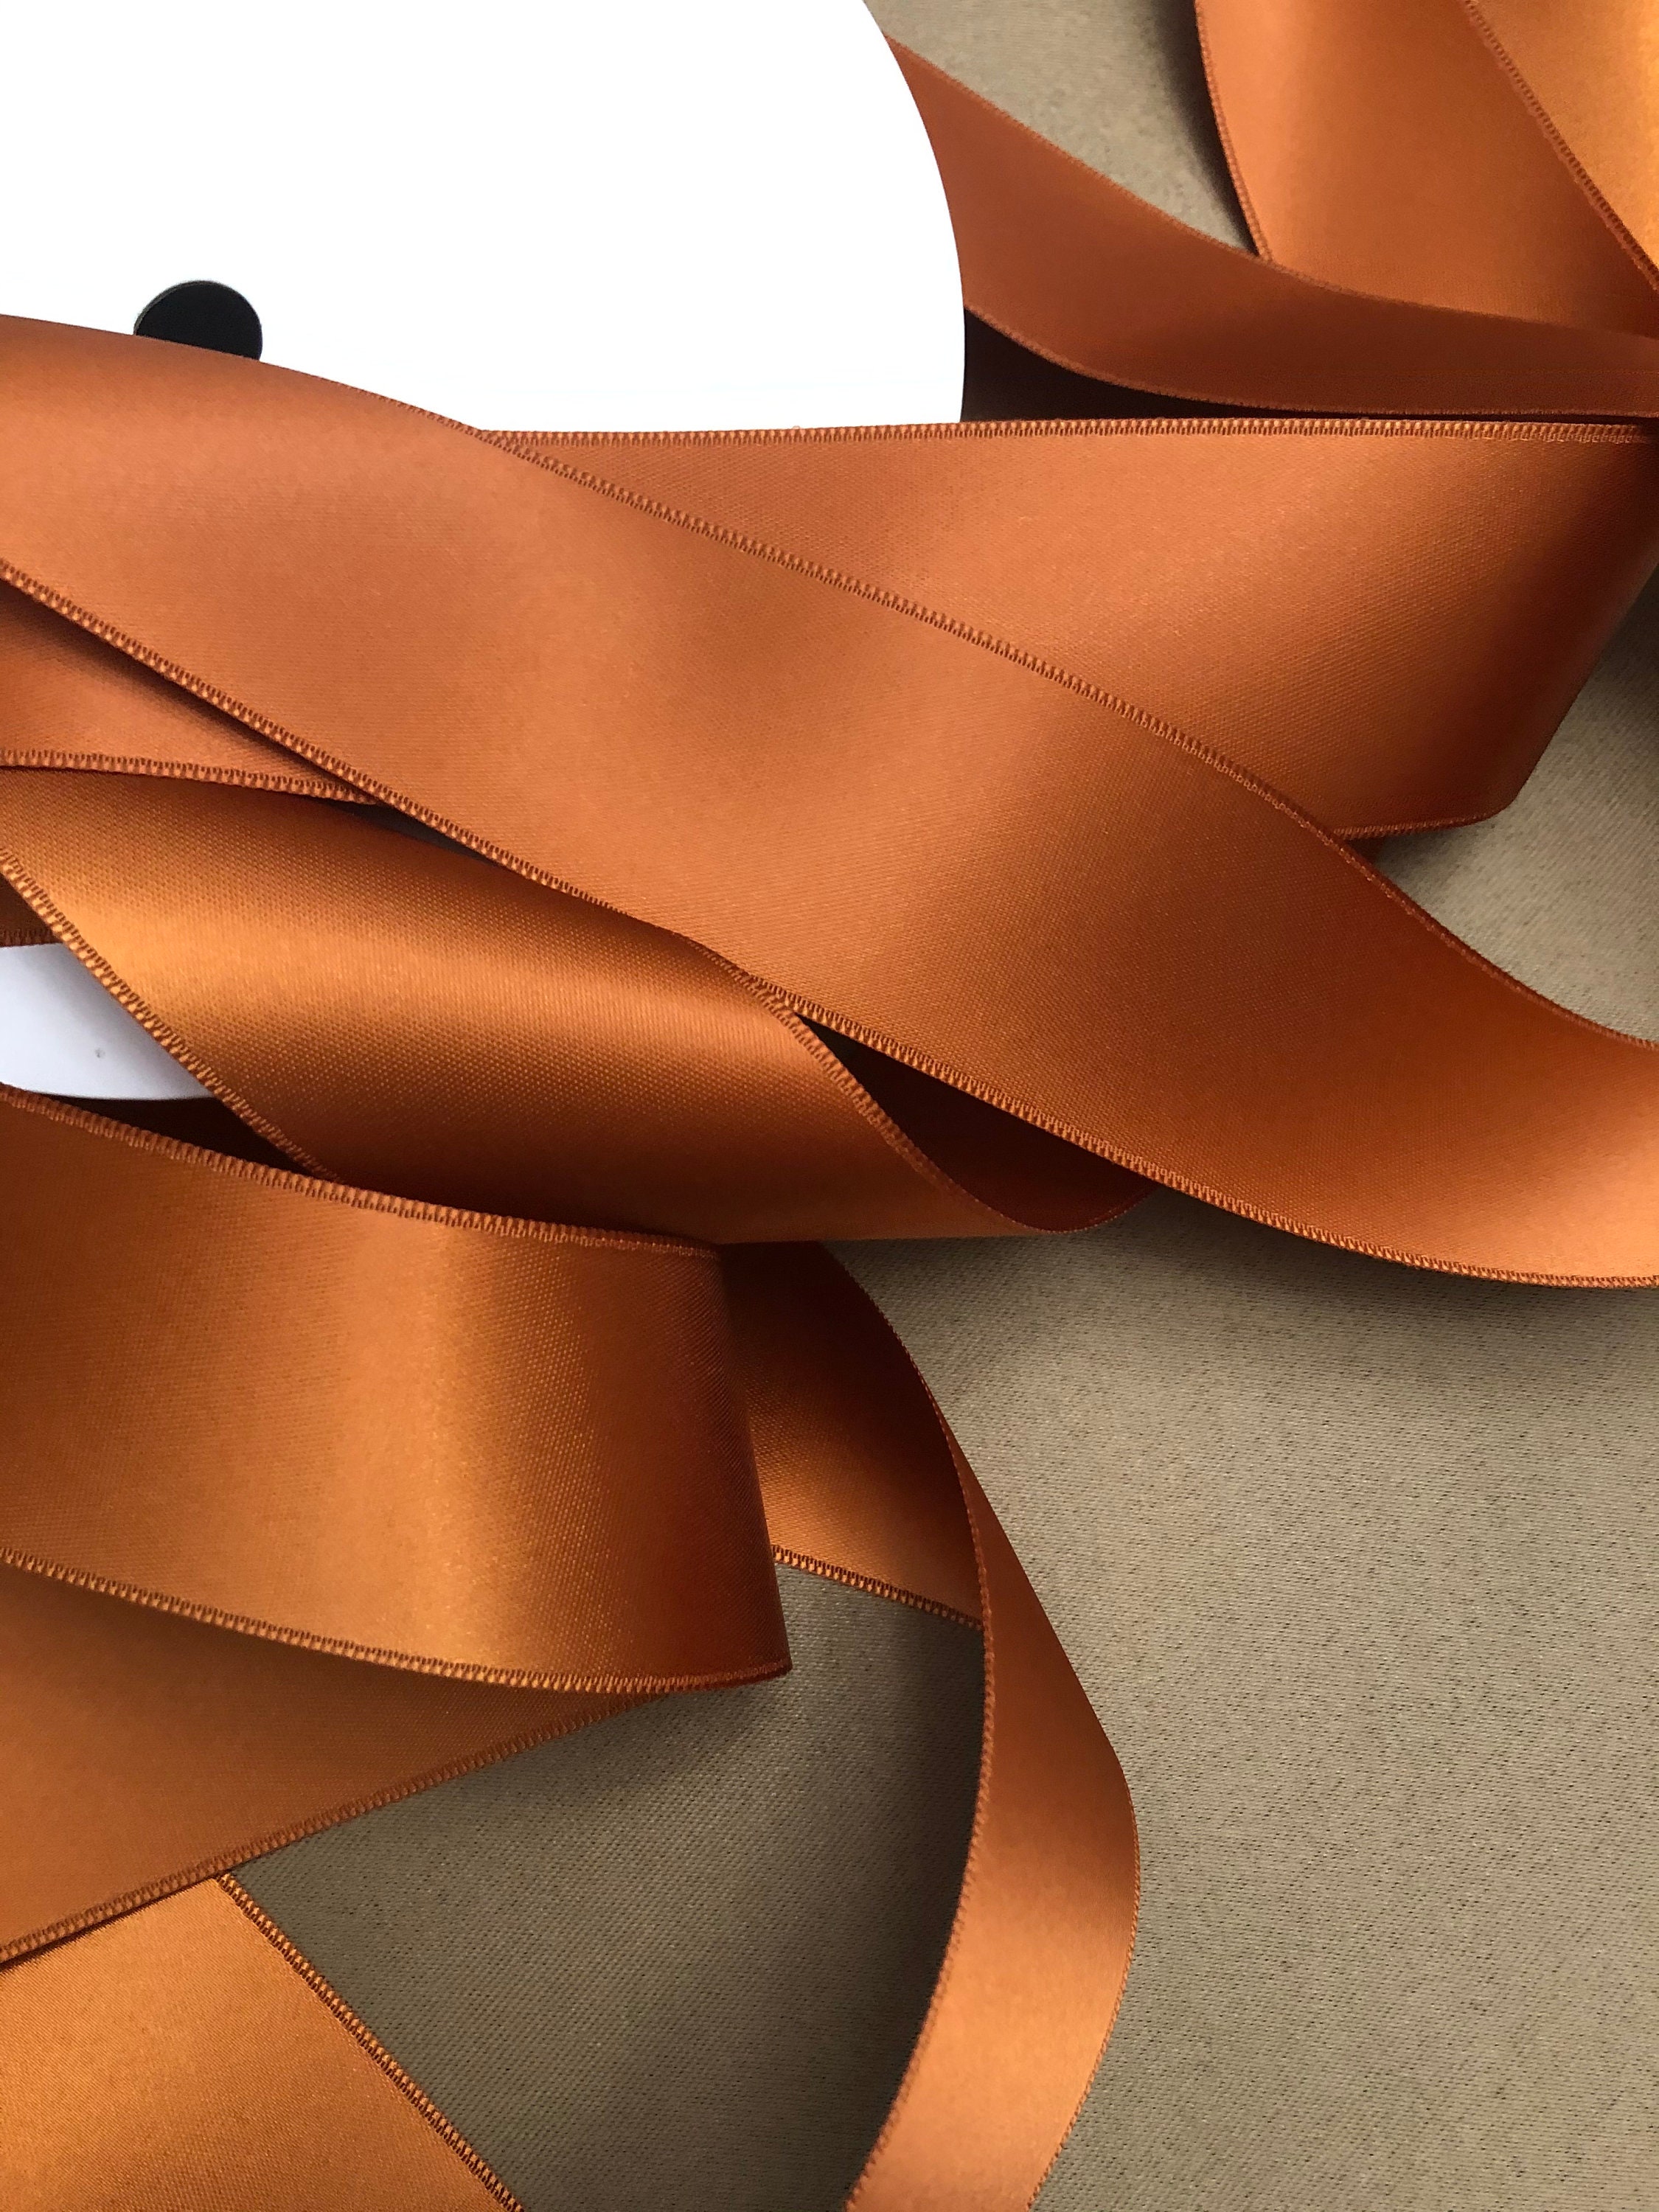 HUIHUANG Rust Red Ribbon 1 inch Extra Density Rust Gift Ribbon Luxury  Shimmer Satin Ribbon for Christmas Holiday Decor, Crafts and Bows, Flower